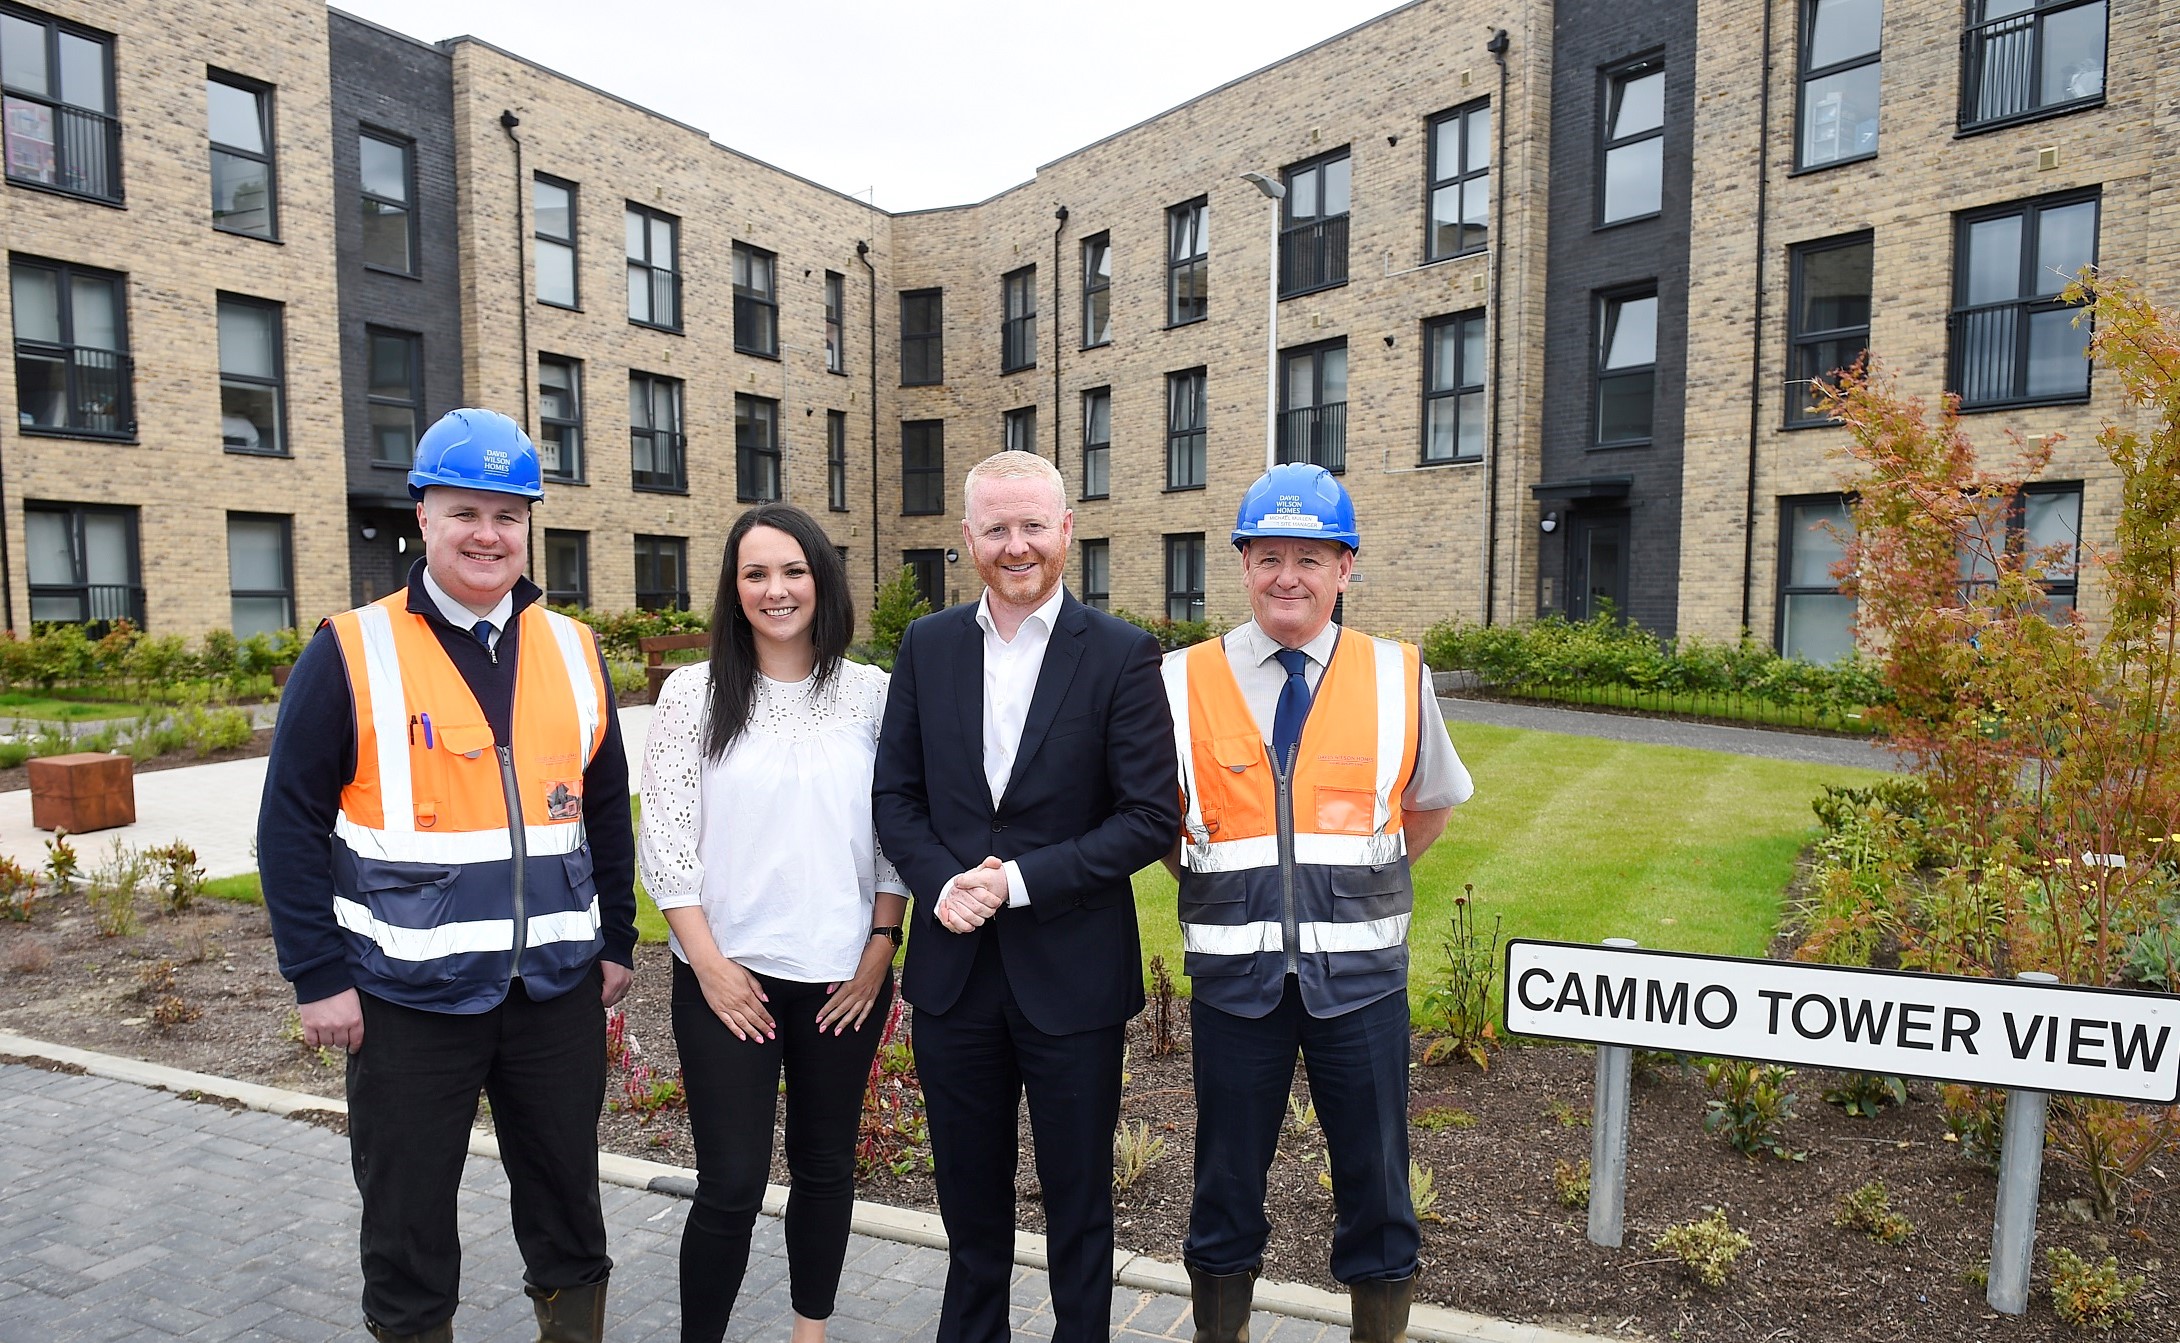 Barratt to deliver 270 affordable homes in Edinburgh and the Lothians